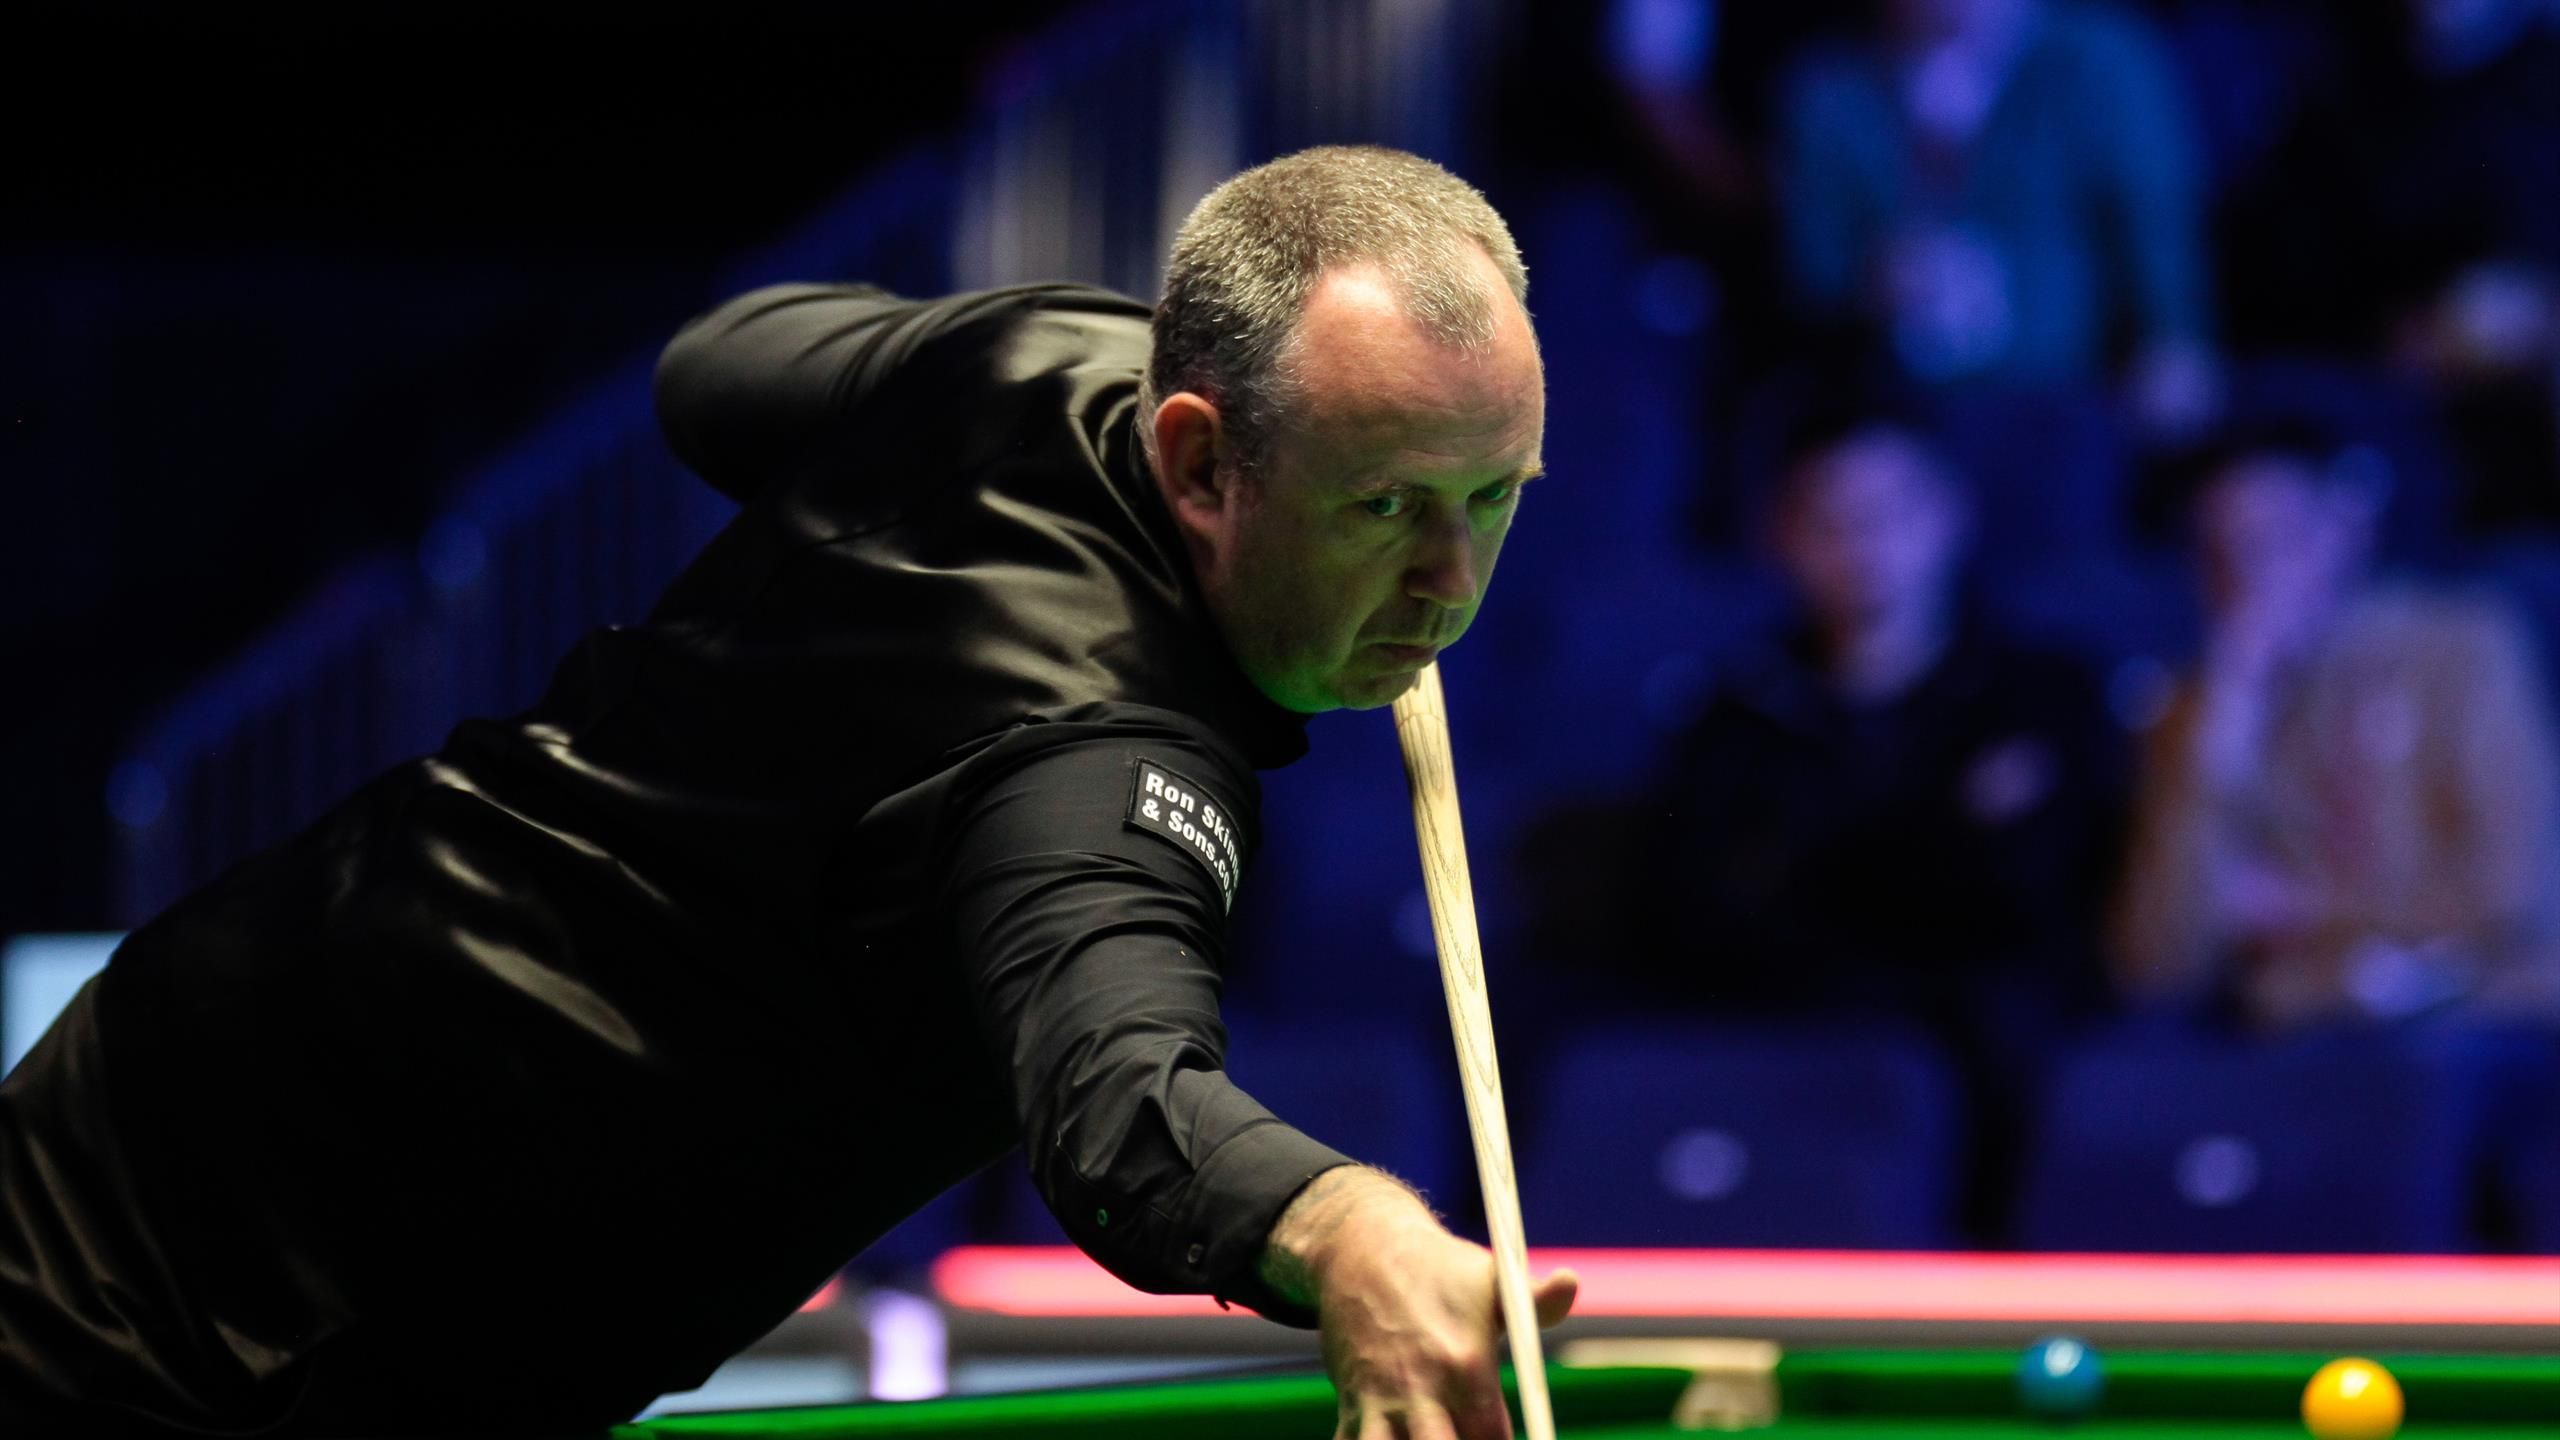 snooker final today live